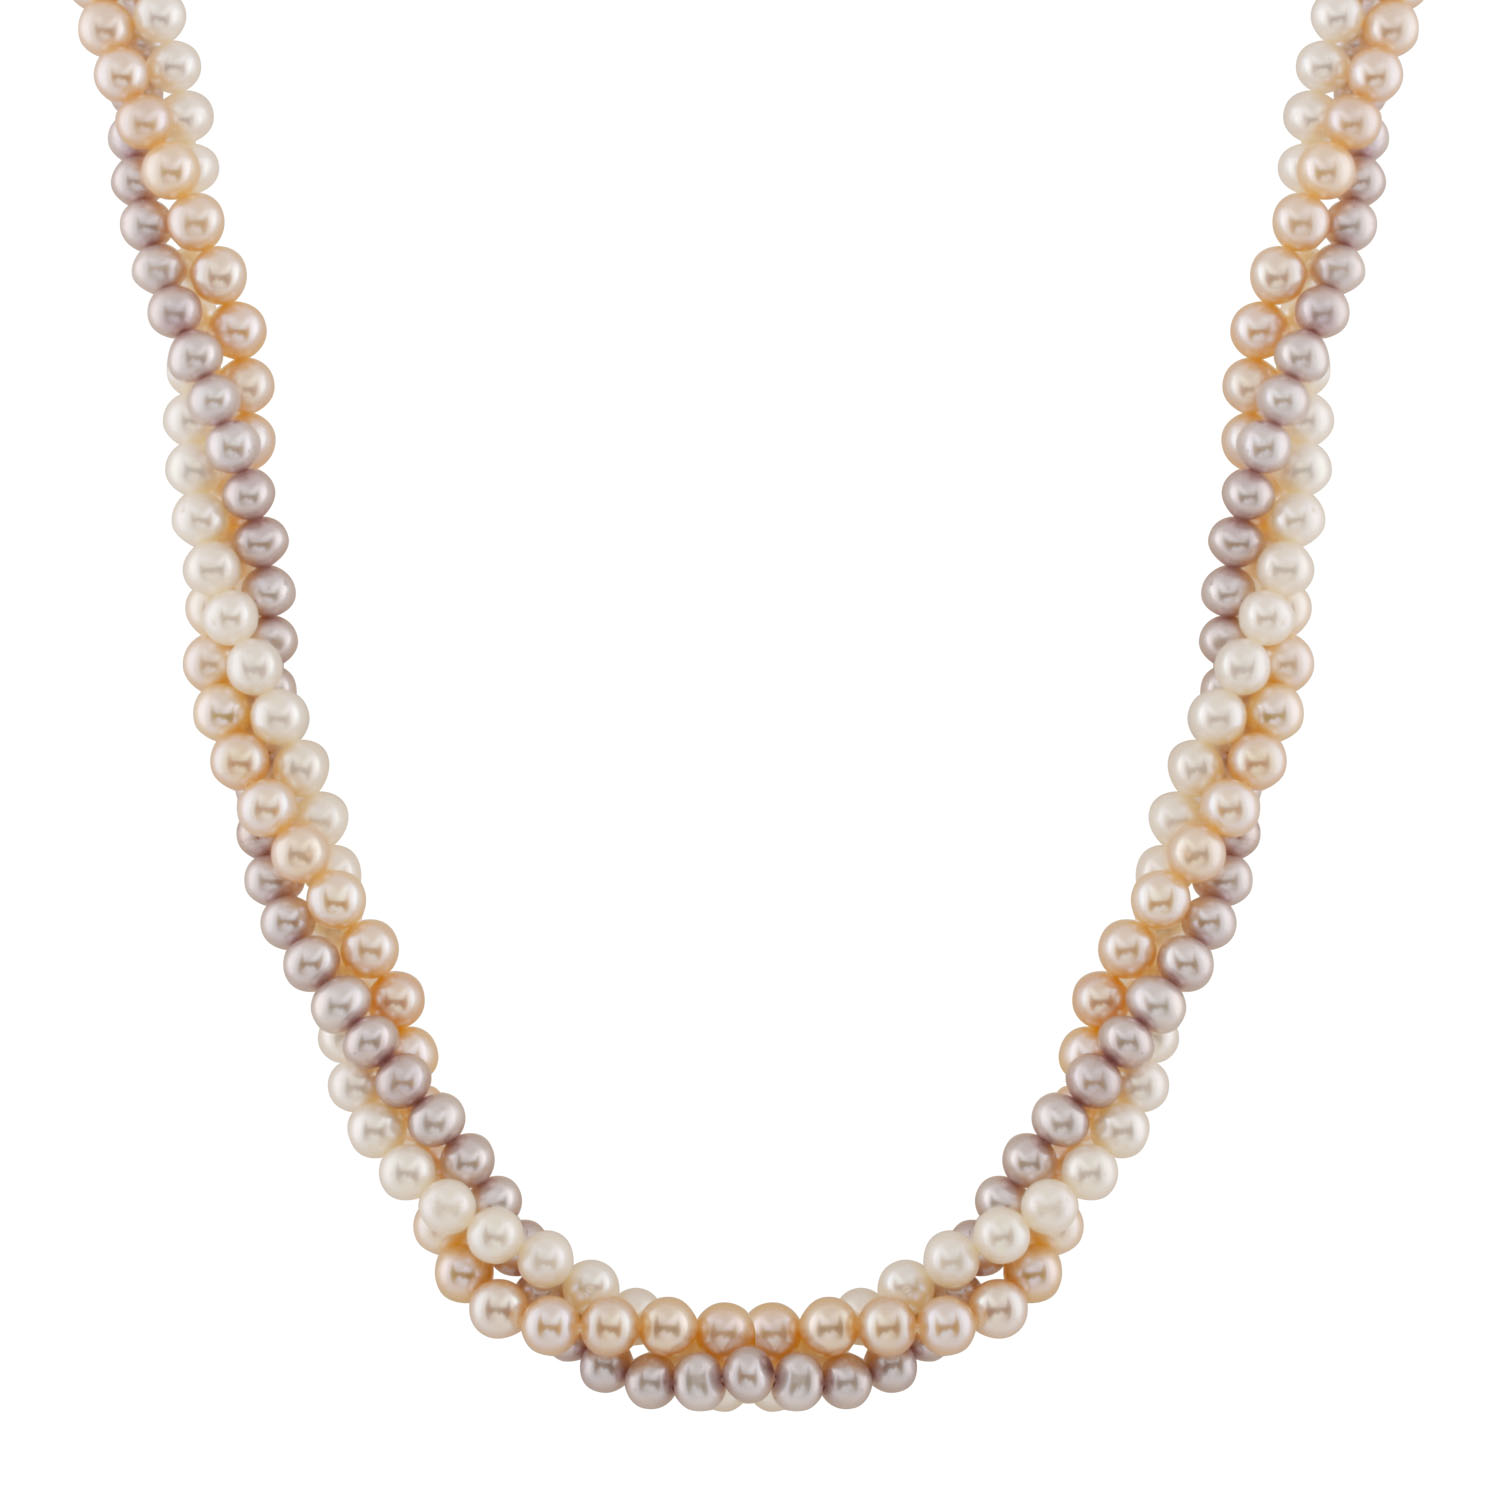 New multi-rows necklace with gold clasp